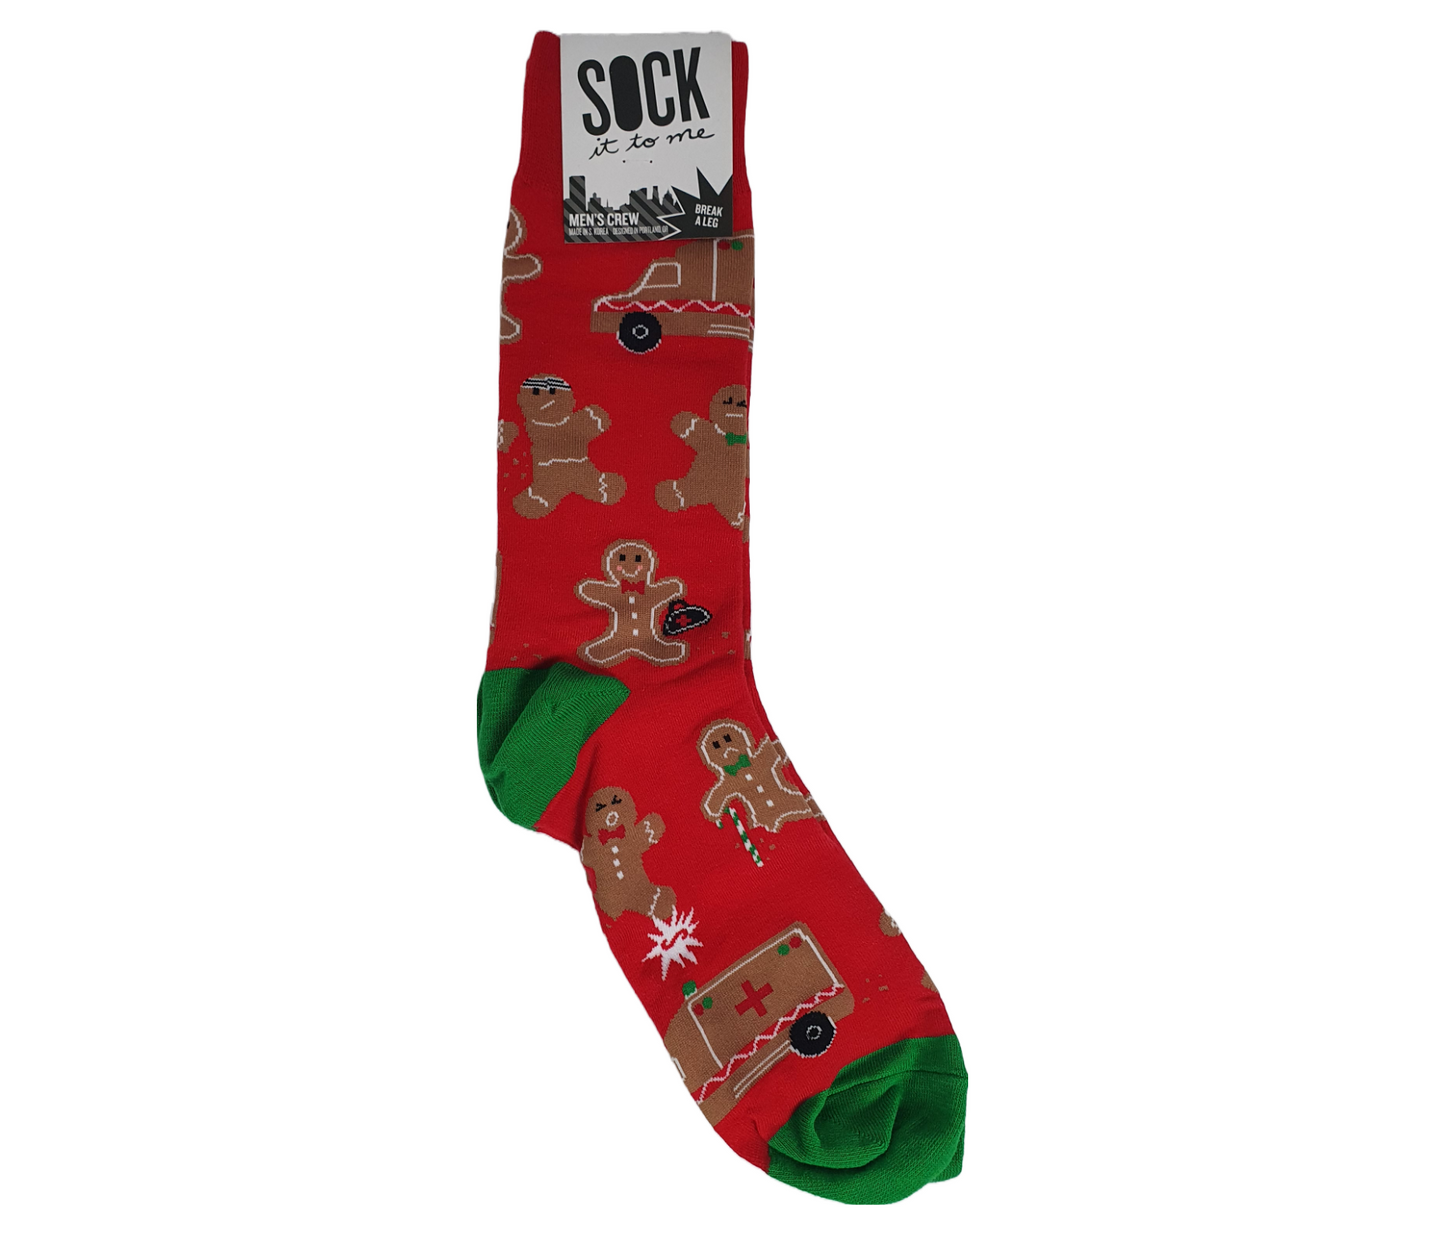 Sock it to Me Holiday Cheer Gift Box Set - Mens Crew: Tacky Holiday Sweater, Tangled Lights, Break a Leg